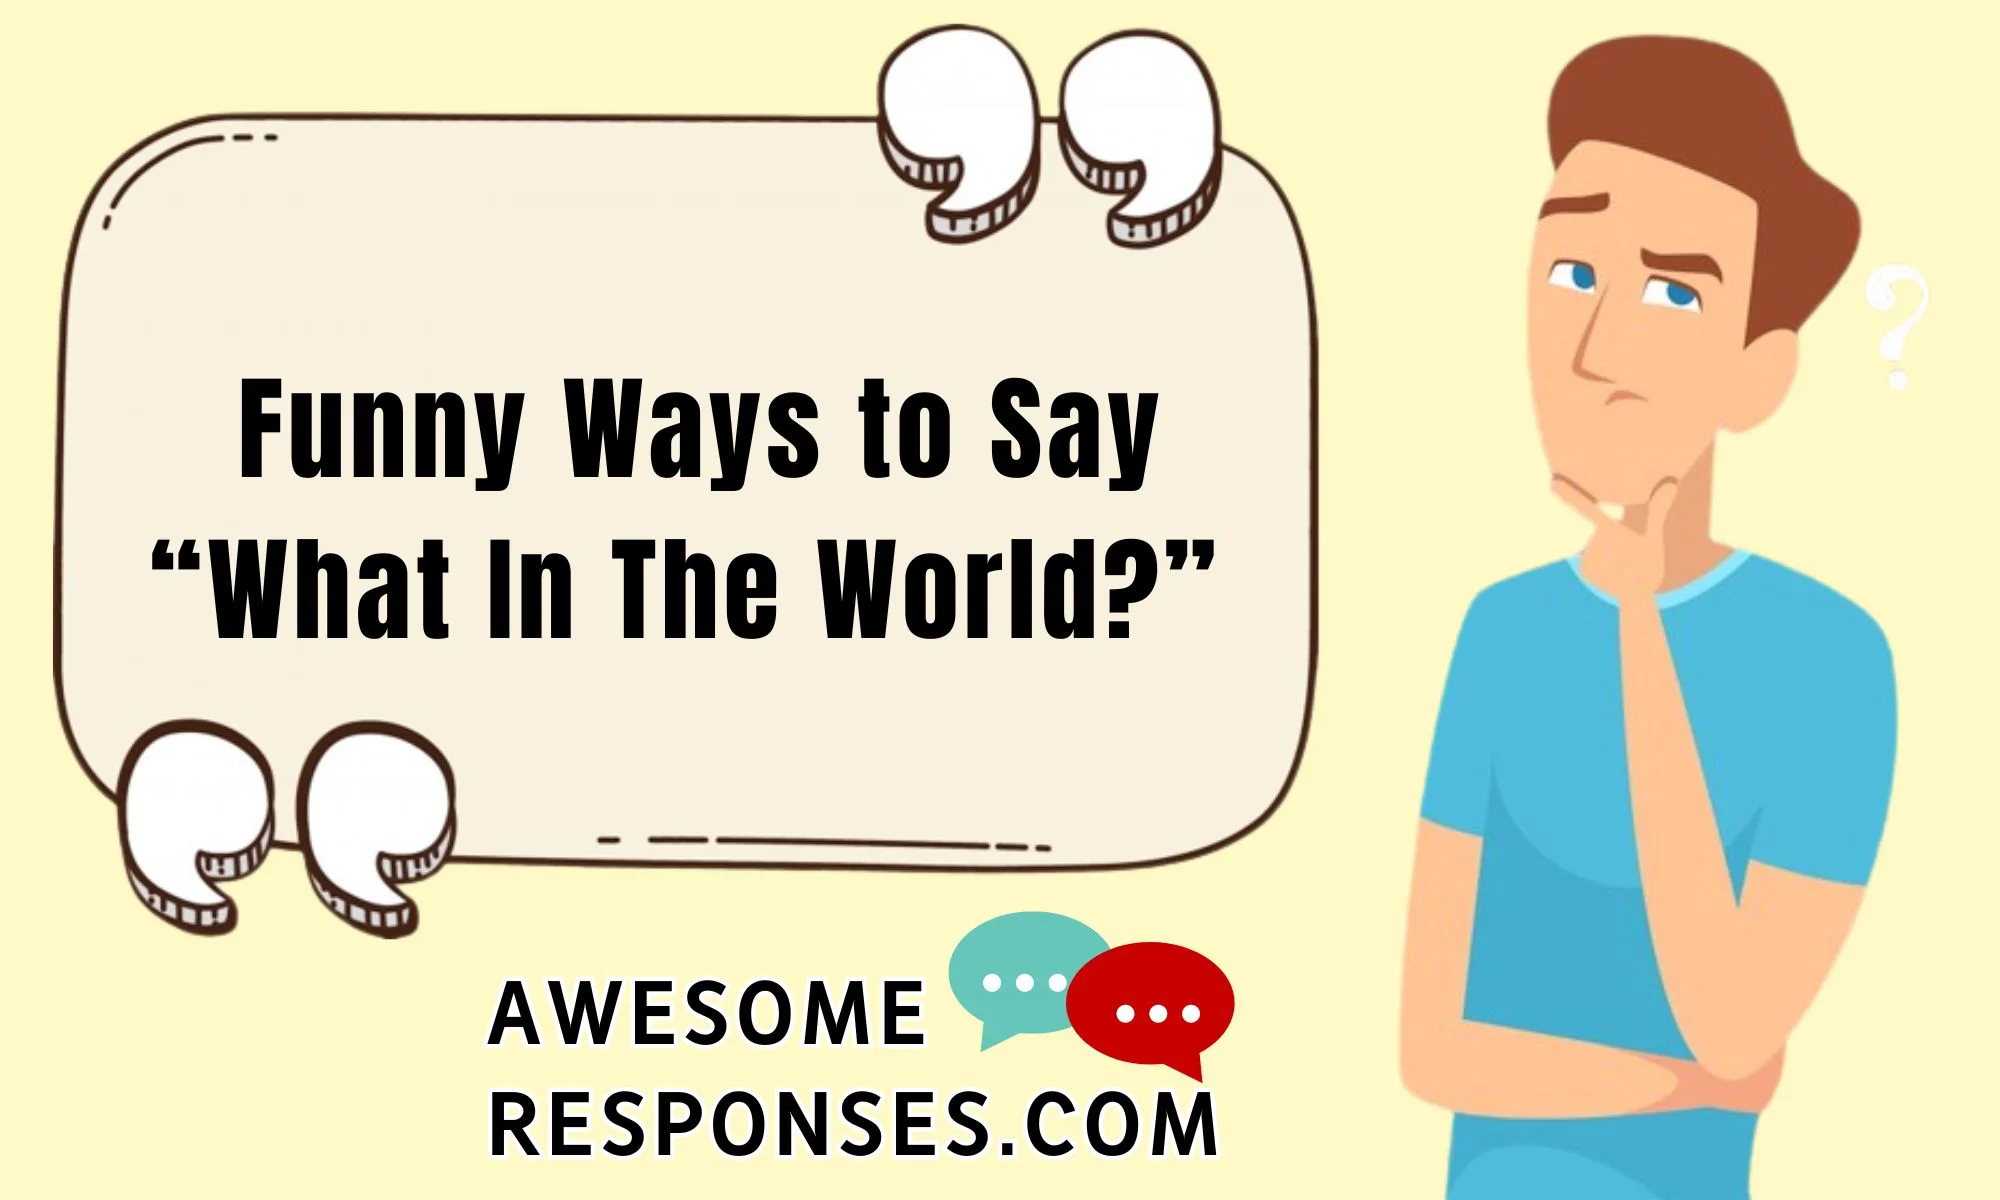 Funny Ways to Say “What In The World?”